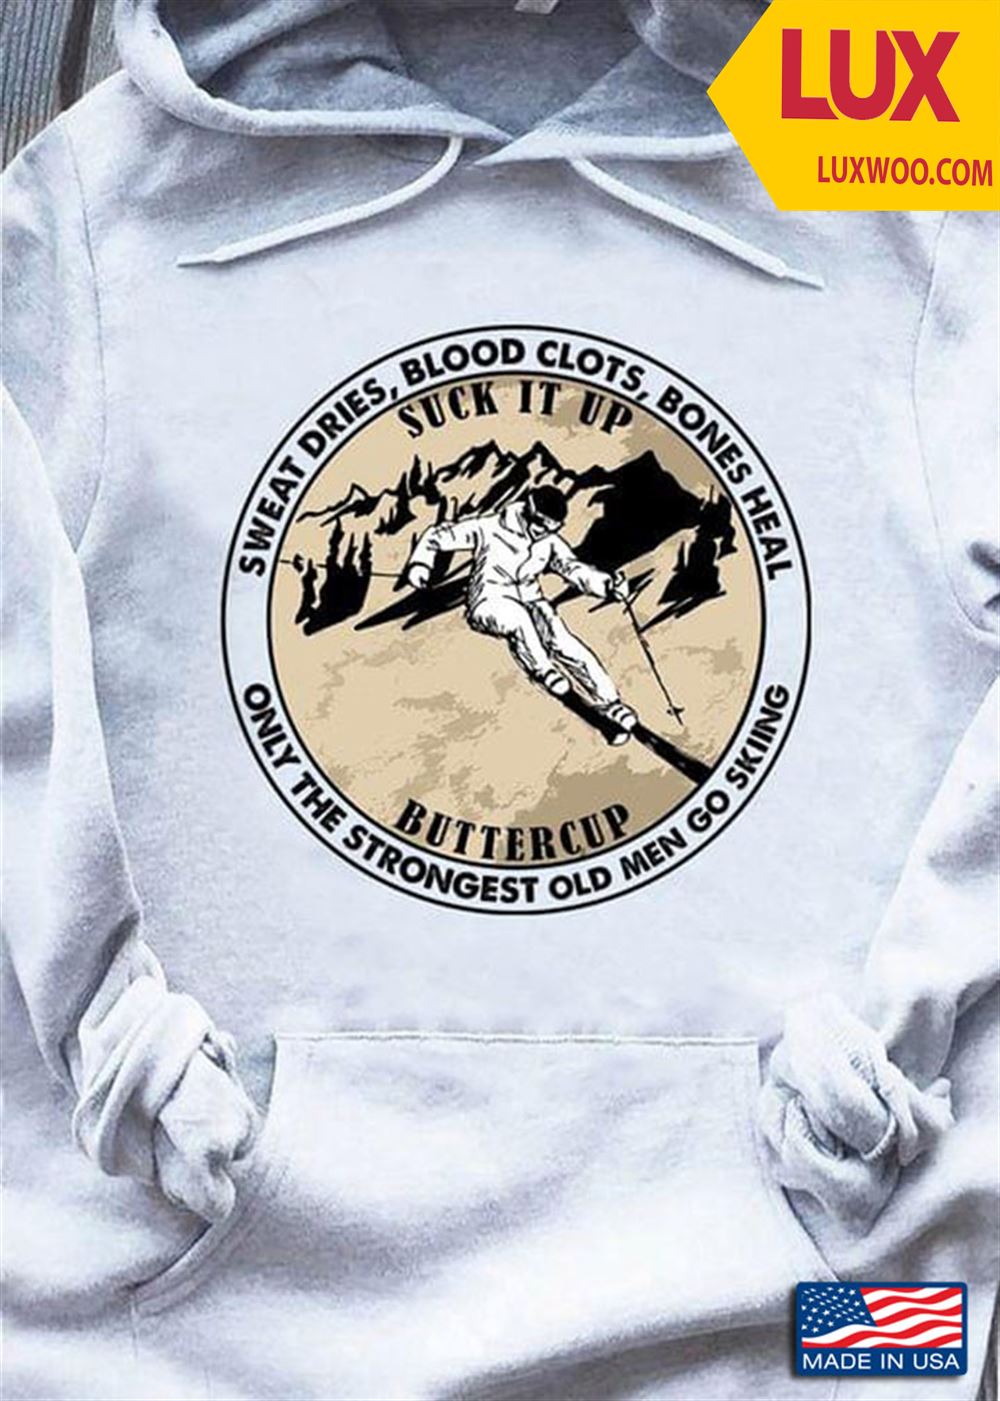 Sweat Dries Blood Clots Bones Heal Suck It Up Buttercup Only The Strongest Old Men Go Skiing Tshirt Size Up To 5xl